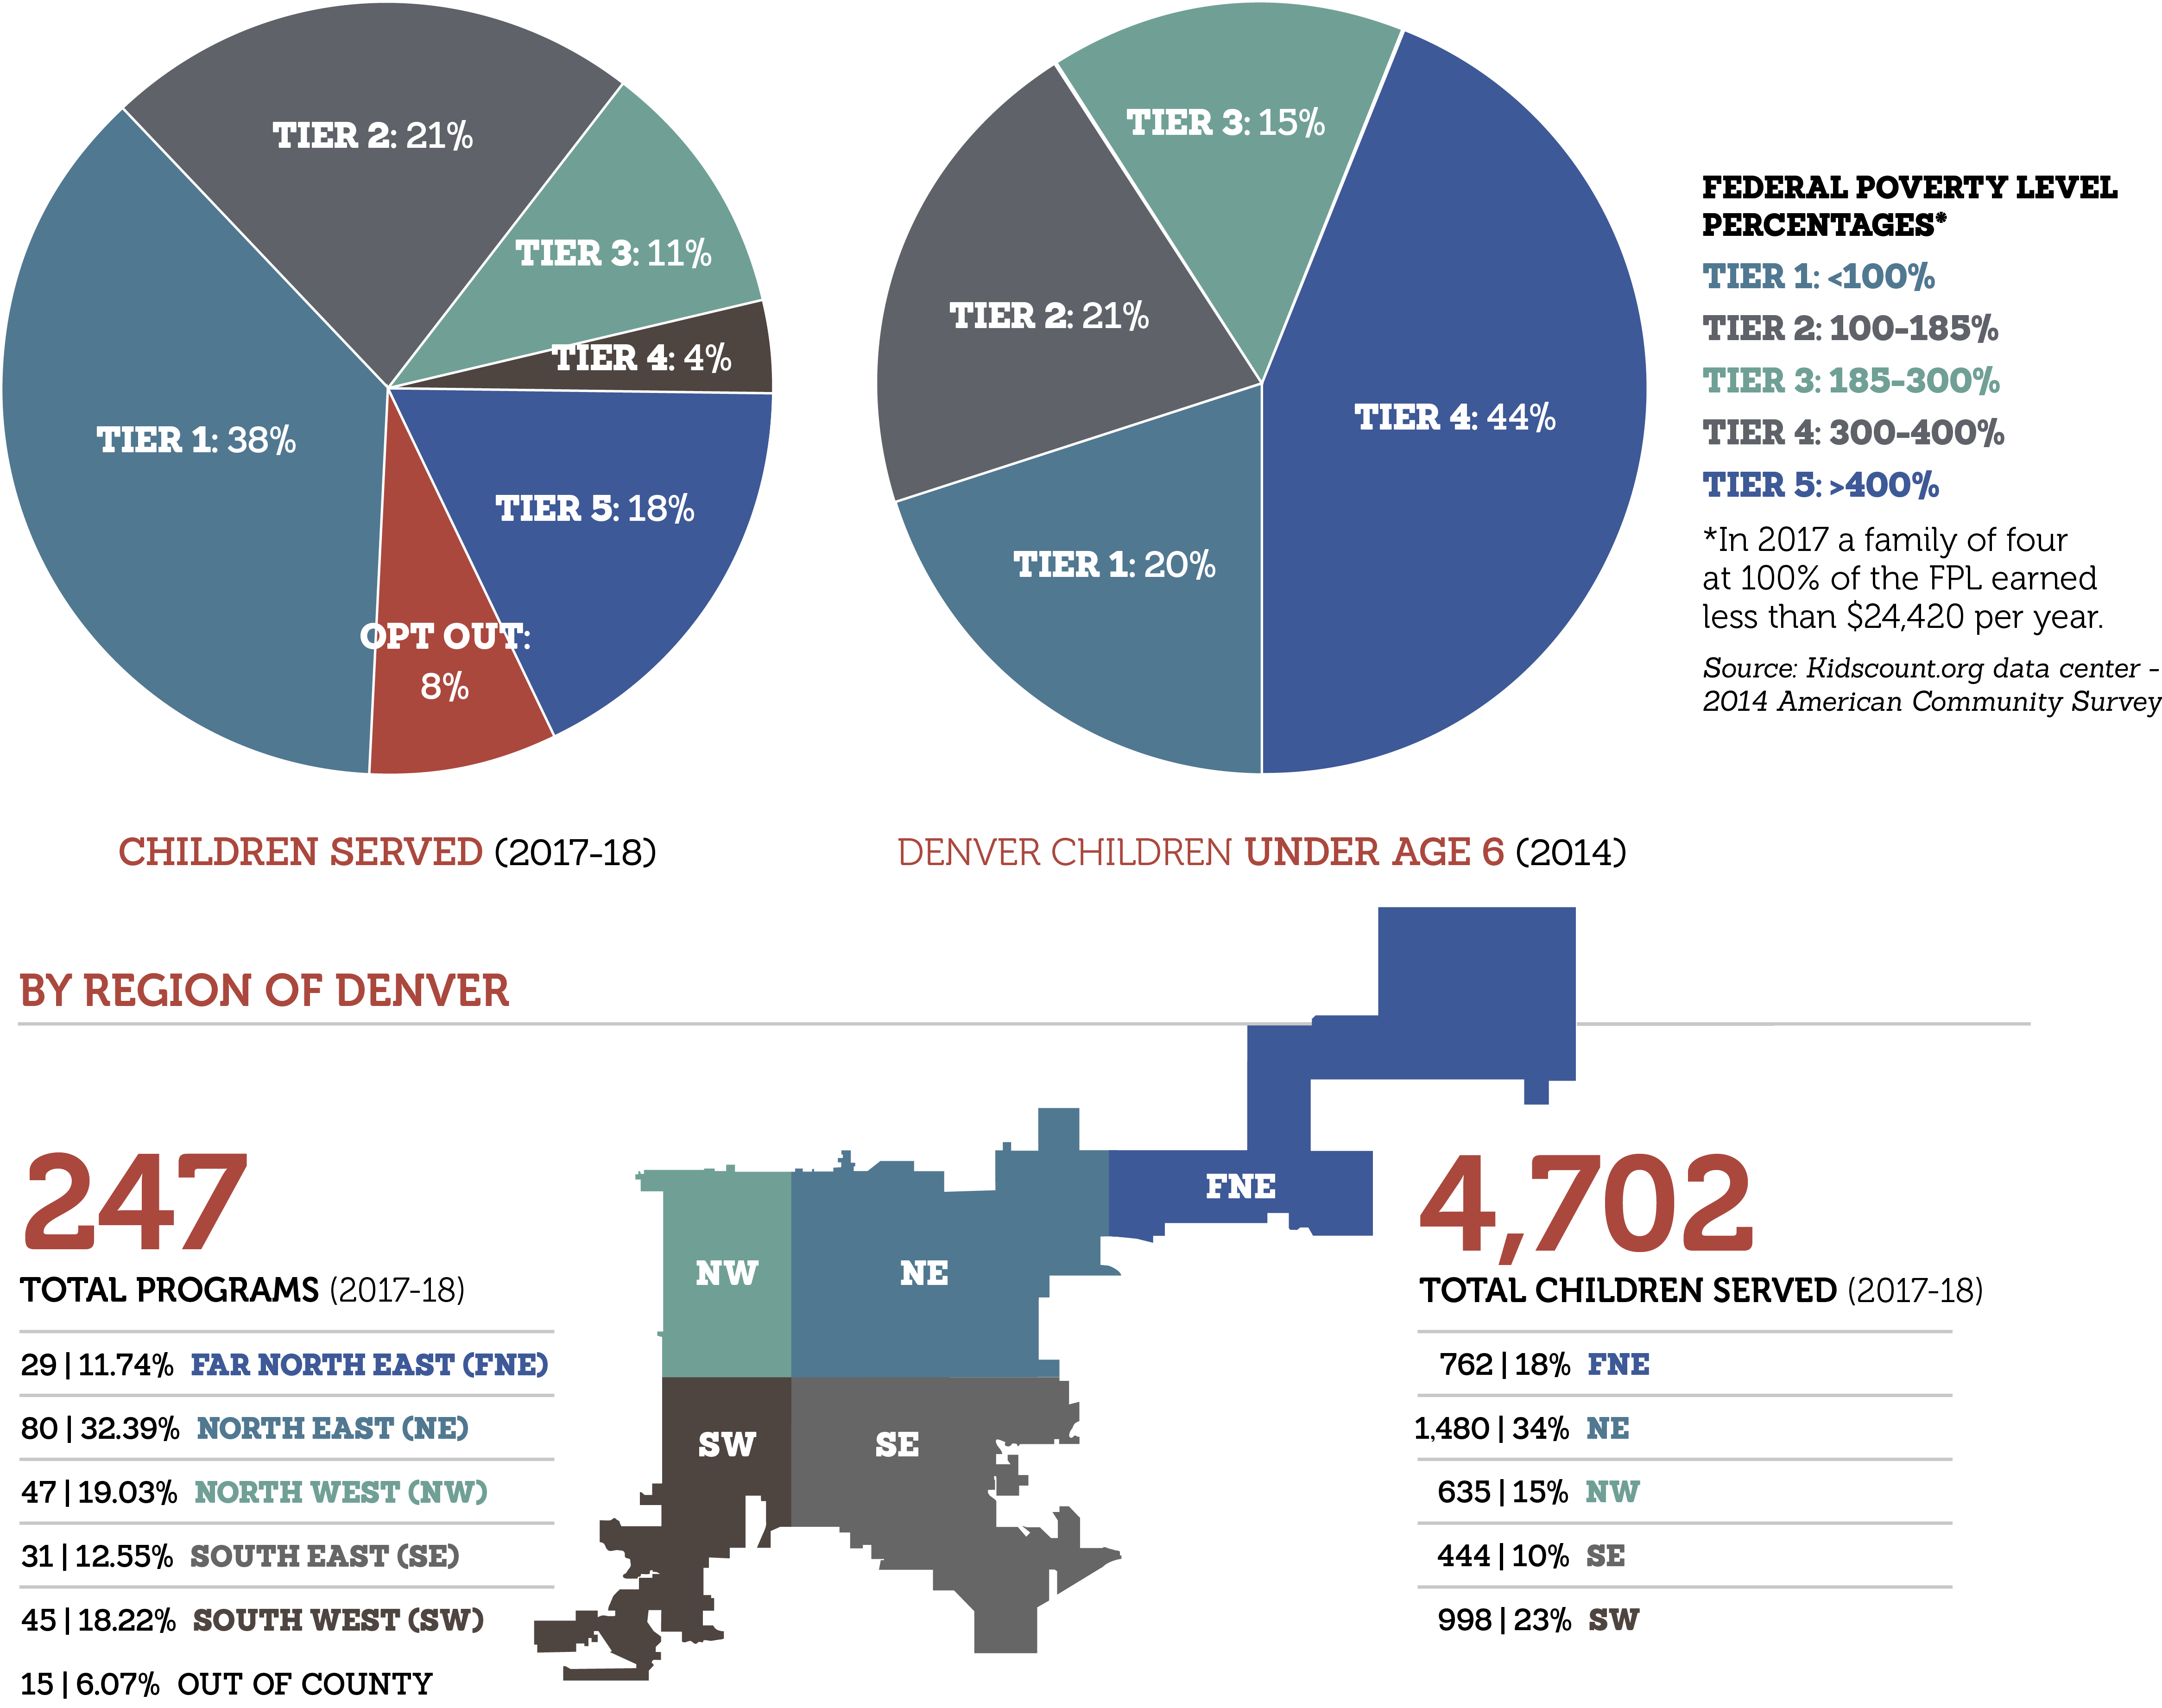 Three graphs that provide information on the number of children DPP has served, under the age of 6 based on federal poverty levels along with specific regions of Denver.